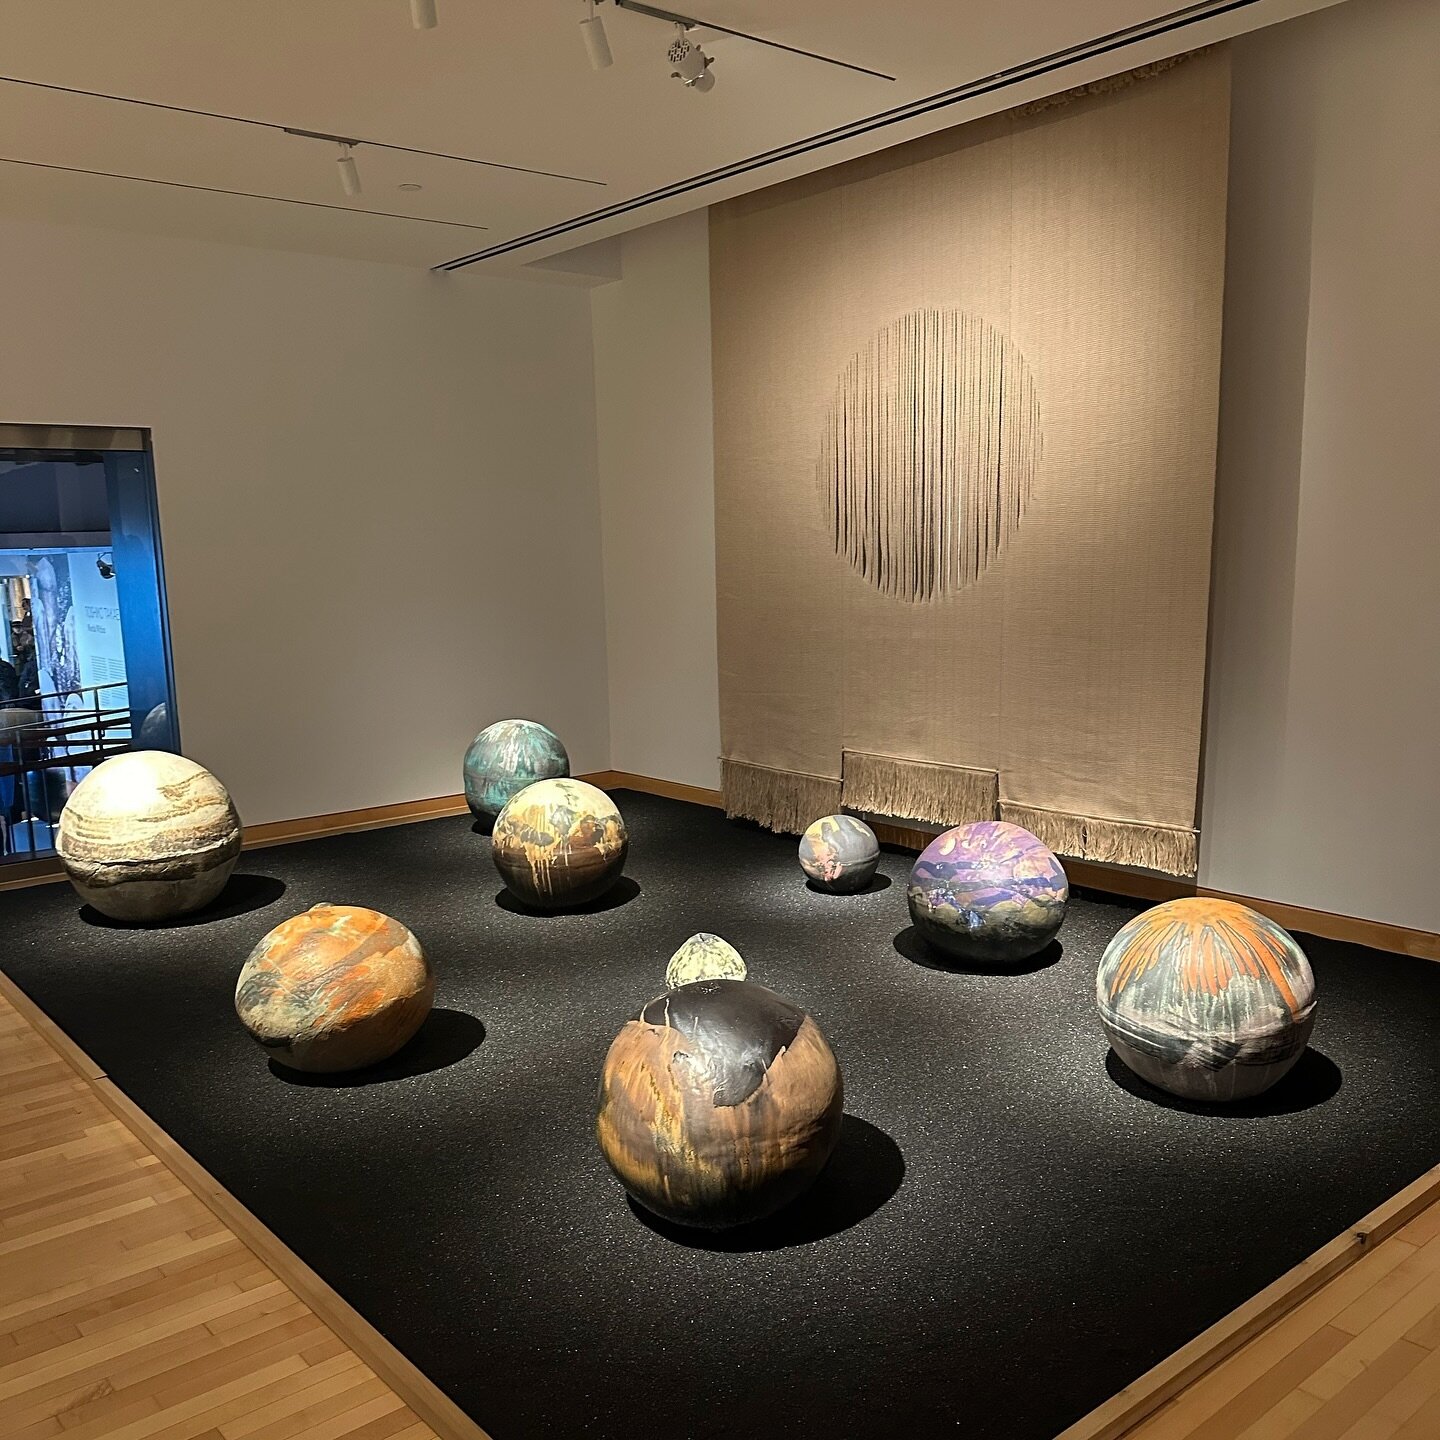 My favorite moment from the newly opened Toshiko Takaezu exhibition at the Noguchi. A planetary system of Toshiko's iconic closed forms orbiting the soft sun of Lenore Tawney's weaving 💕